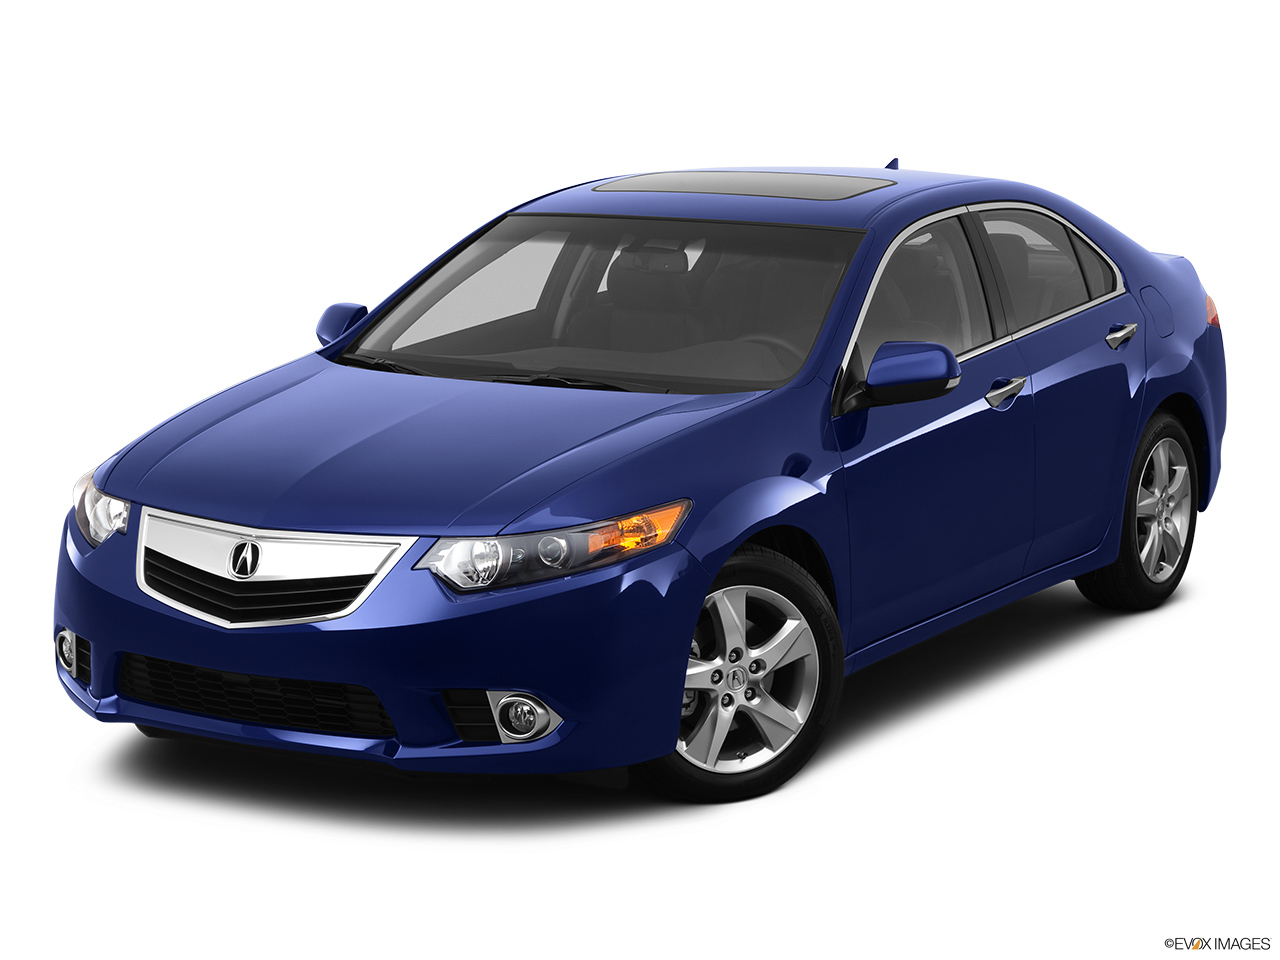 2012 Acura TSX TSX 5-speed Automatic Front angle view. 